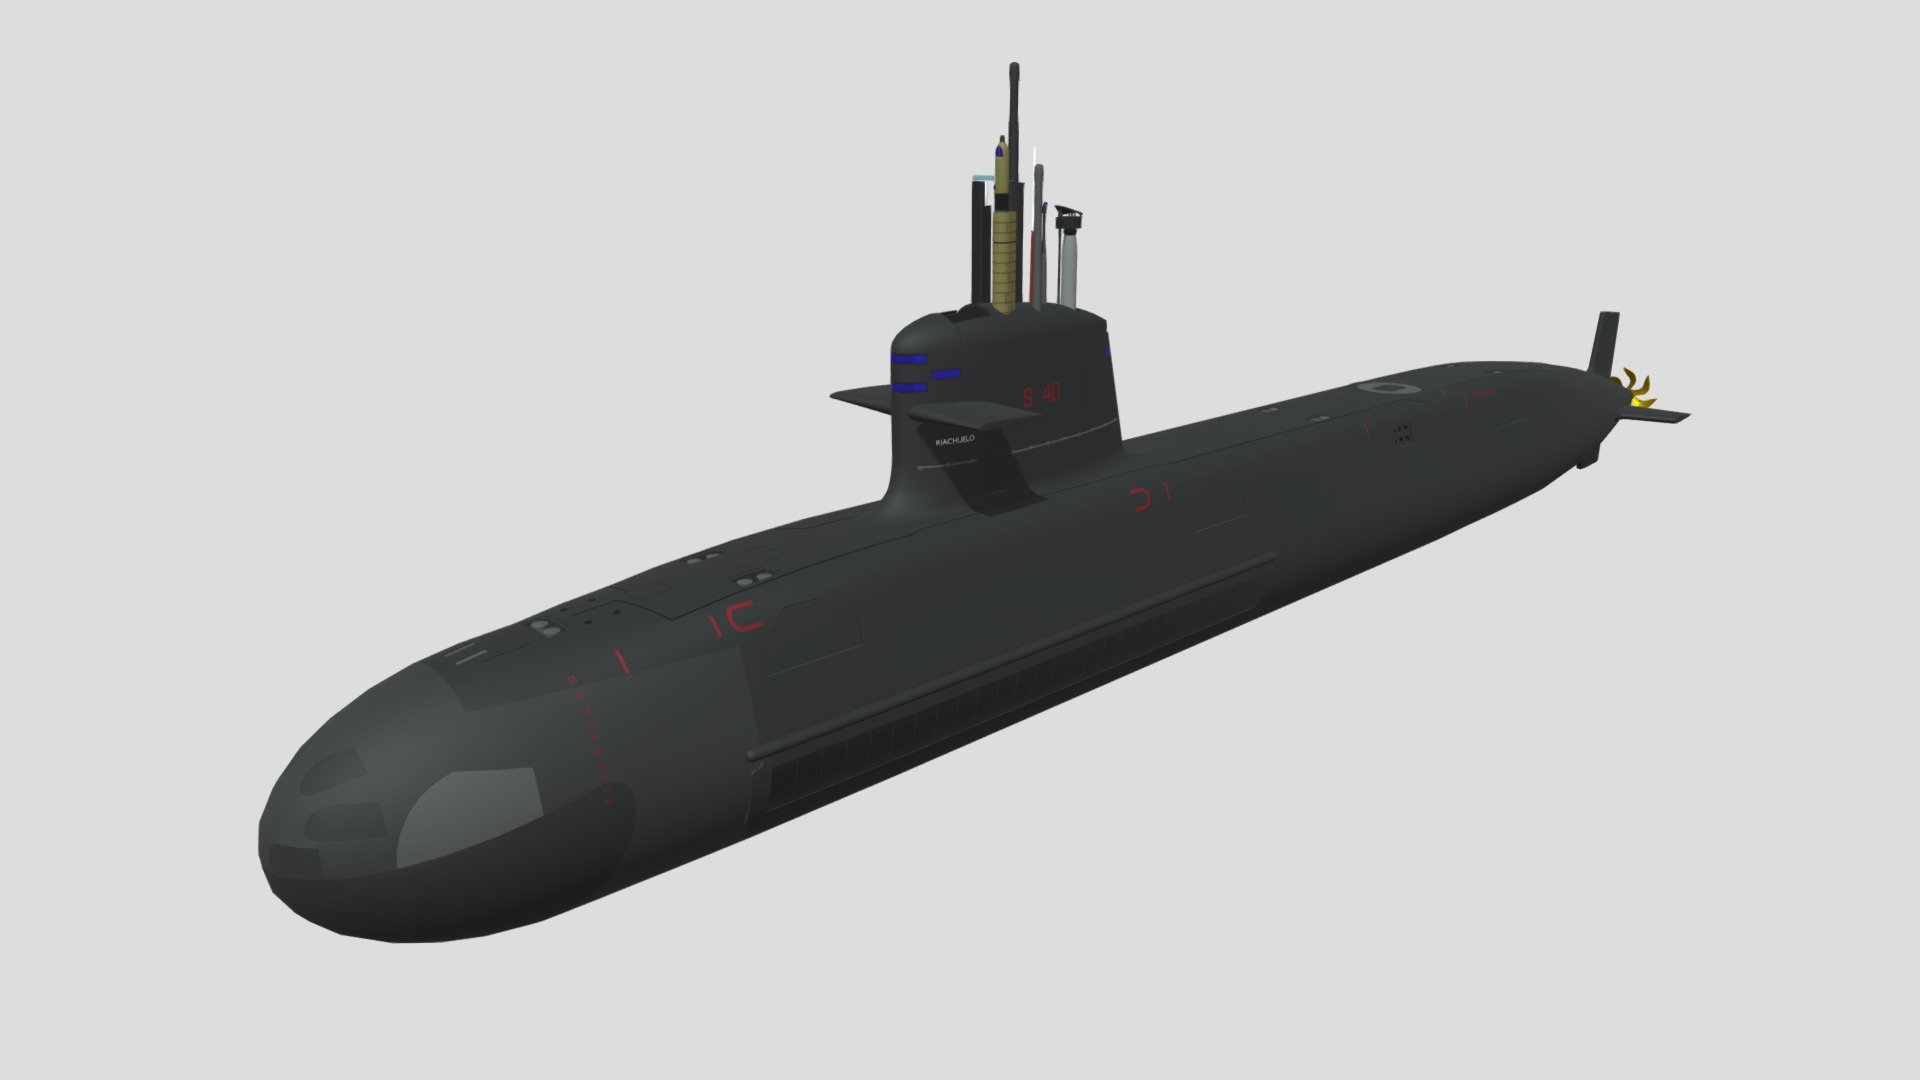 The S-40 Riachuelo is the first of the Riachuelo class which is a Brazilian variant of the French Scorpène class submarine.
This version is bigger than the other variants and Brazil has acquired 4 of them, the first two are in the testing phase and the other two are in the construction phase, and the S-40 Riachuelo is expected to be active until 2023.
The model was made in Blender 3.2.1 - S-40 - Riachuelo - Scorpène Class Variant - 3D model by DFL81 3d model